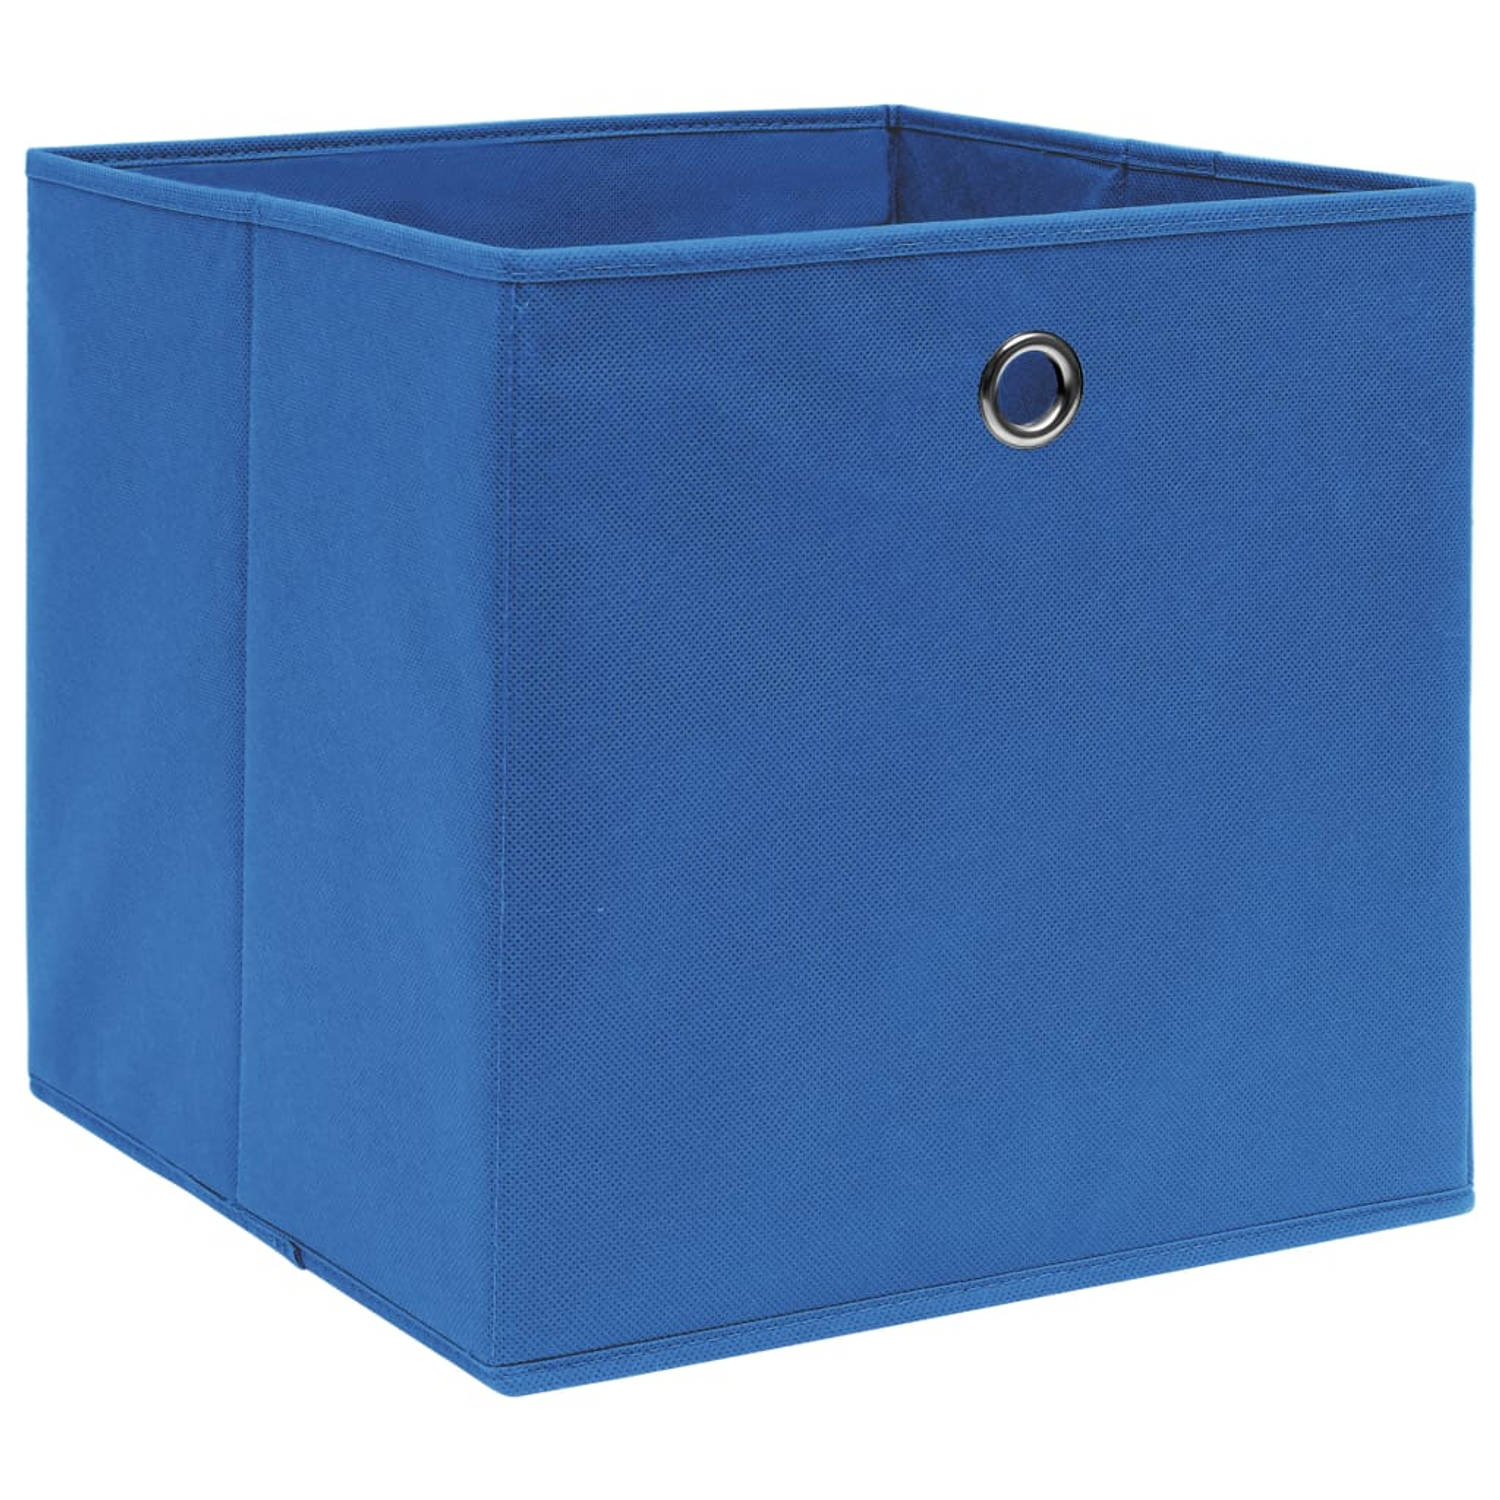 The Living Store Opbergboxen 4 st 28x28x28 cm nonwoven stof blauw - Opberger